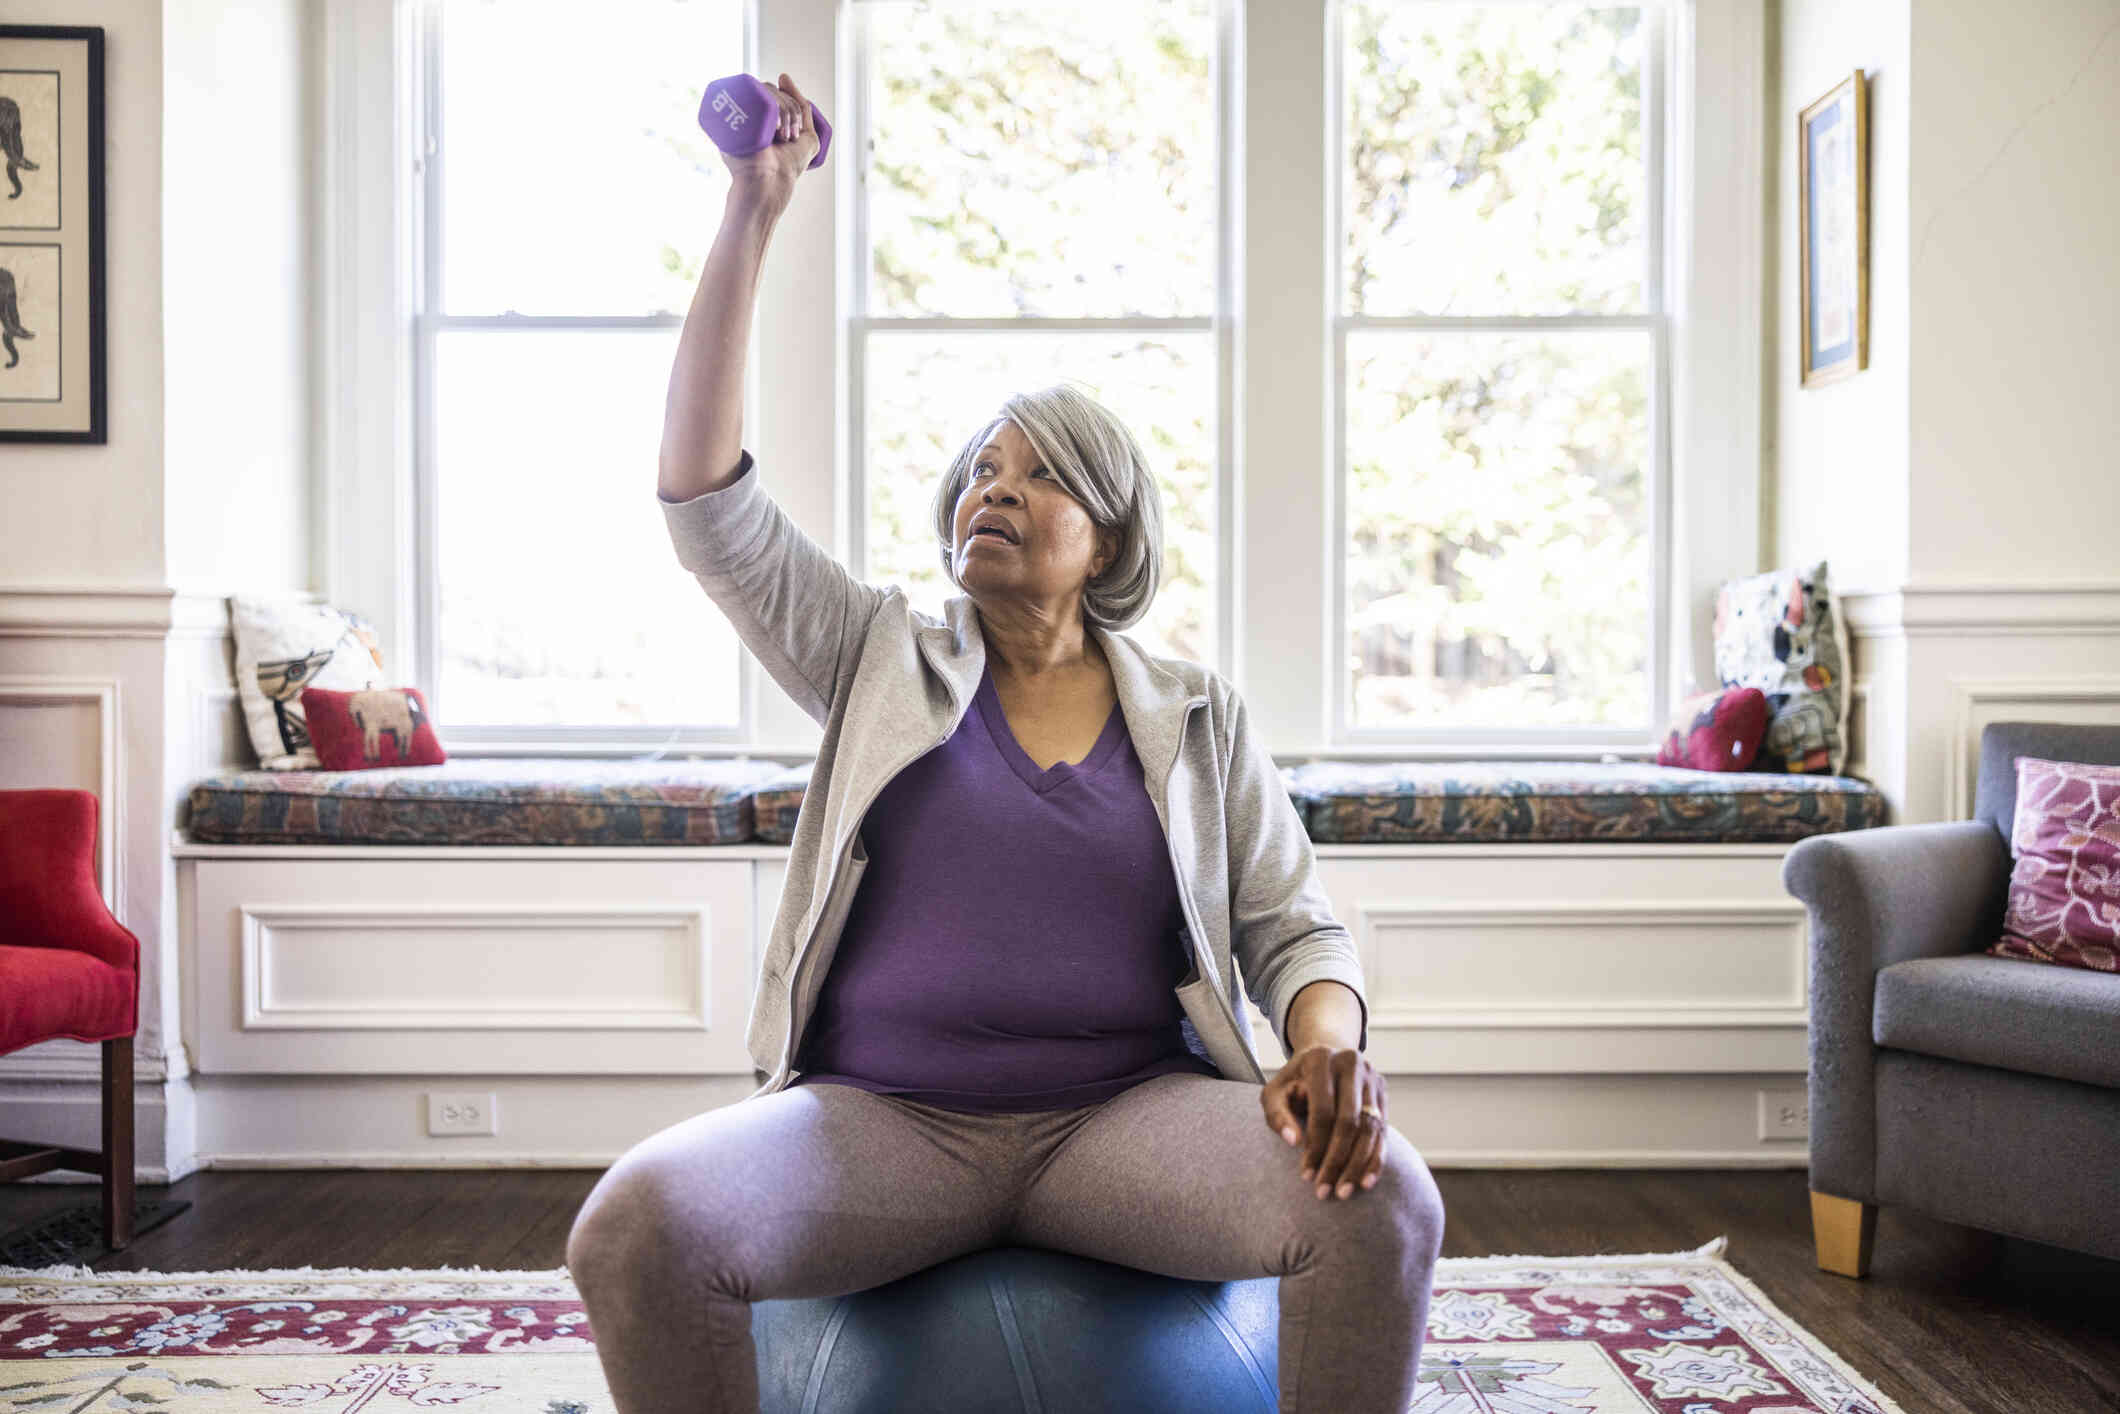 An elderly woman in a purple shirt sits on a workout ball in her home while lifting purple 3 pound weights.